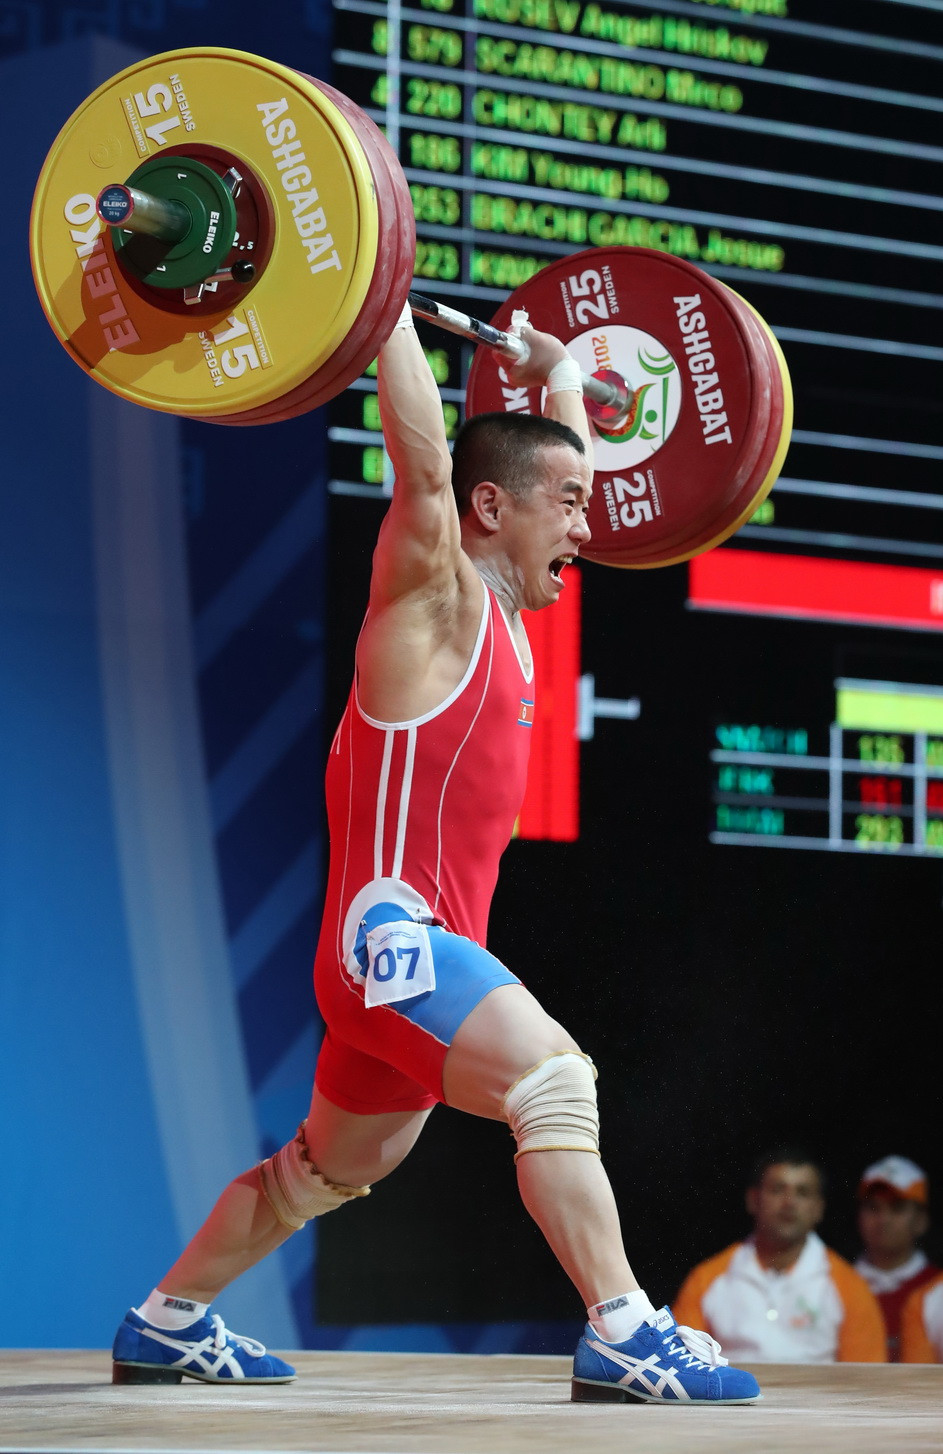 Om managed 162kg with his final clean and jerk attempt to better the previous mark of 161kg and finish on a total of 282kg ©IWF